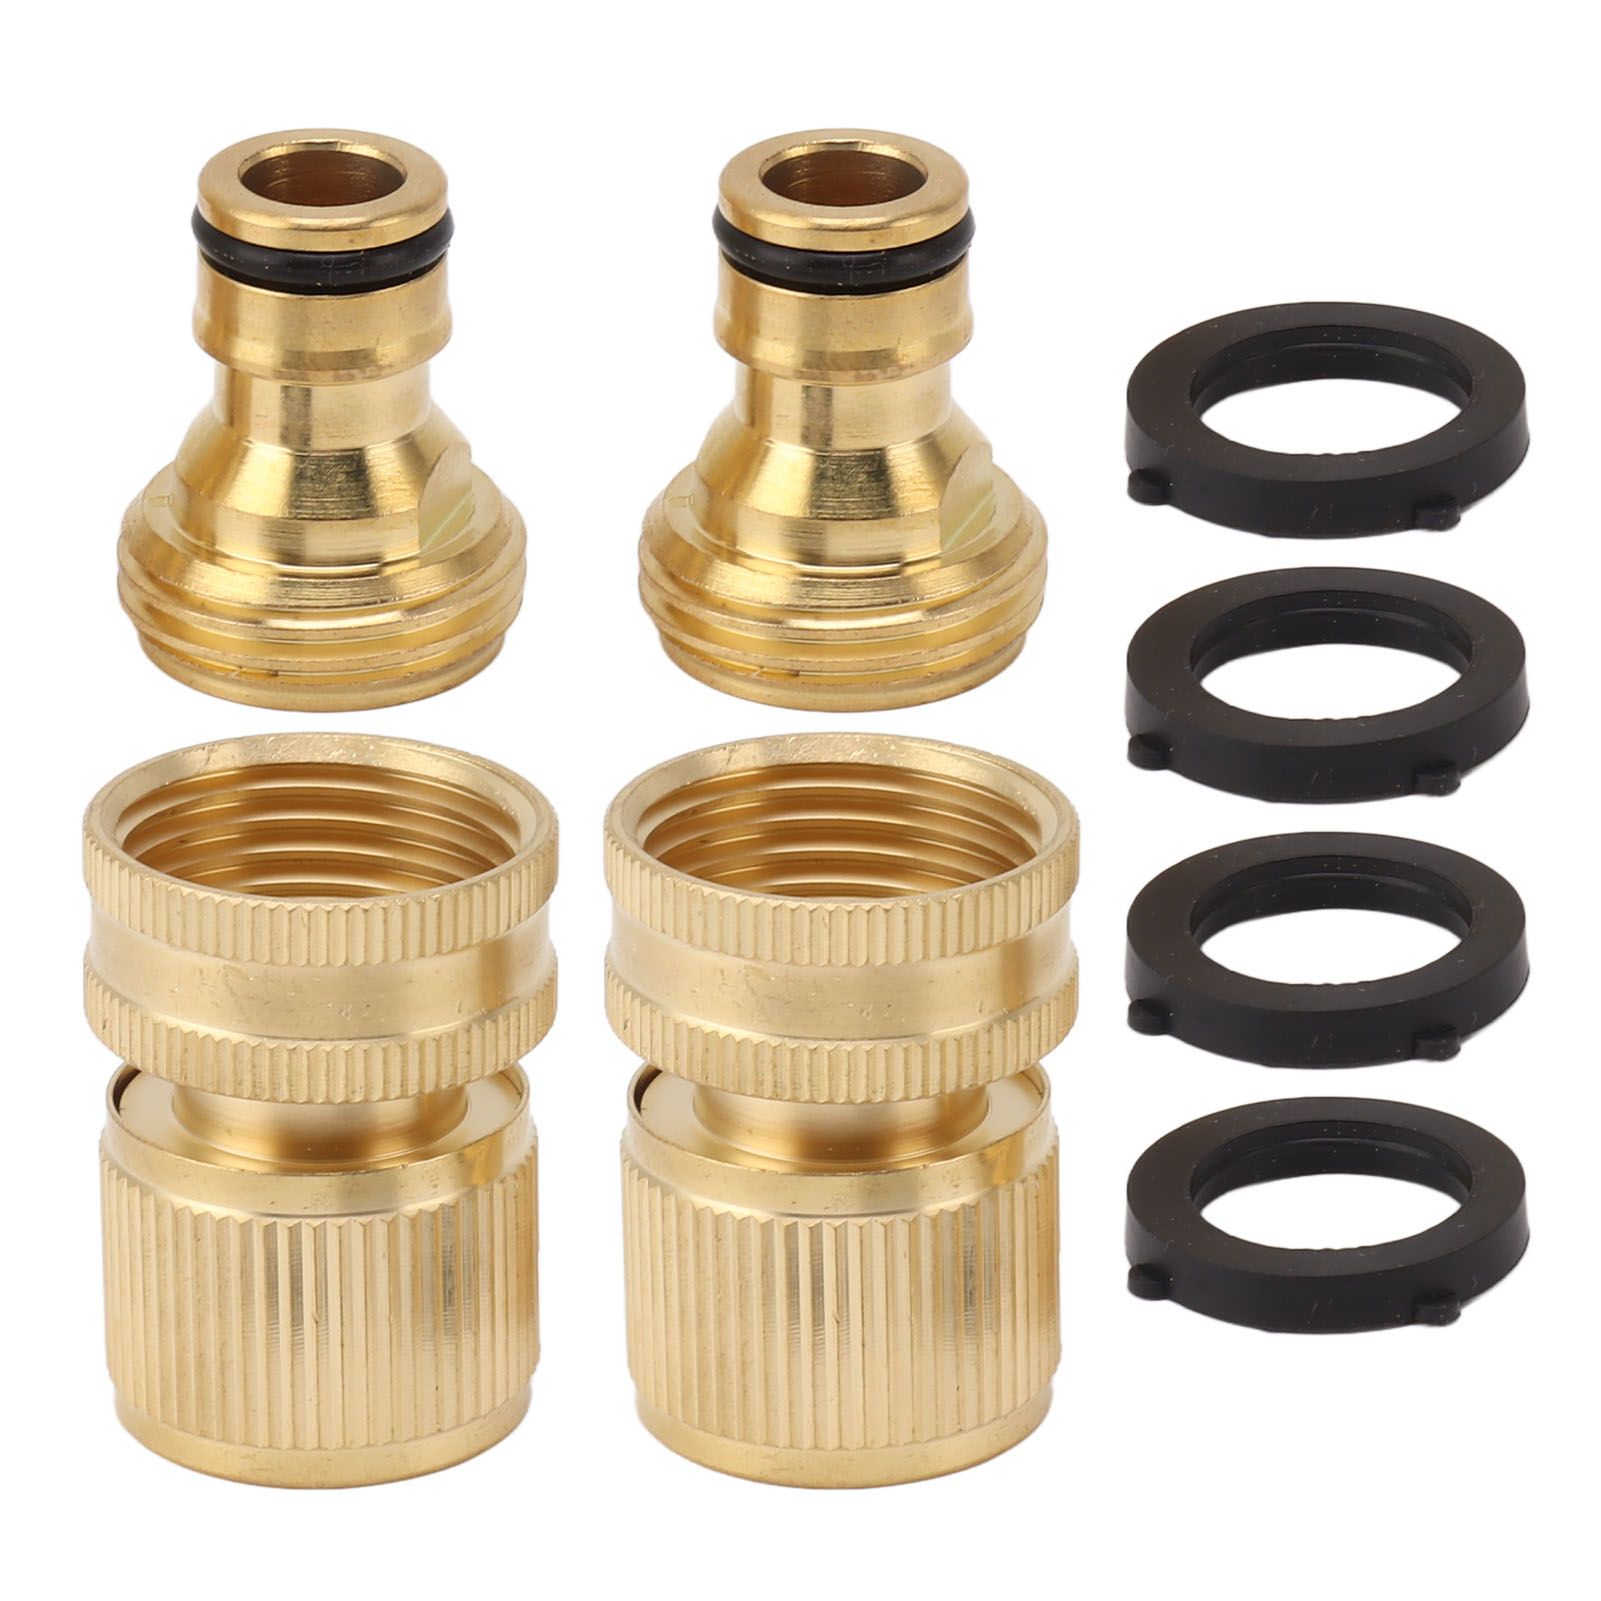 2PCS Water Hose Quick Connector Brass 3/4 Inch Male and Female Garden ...